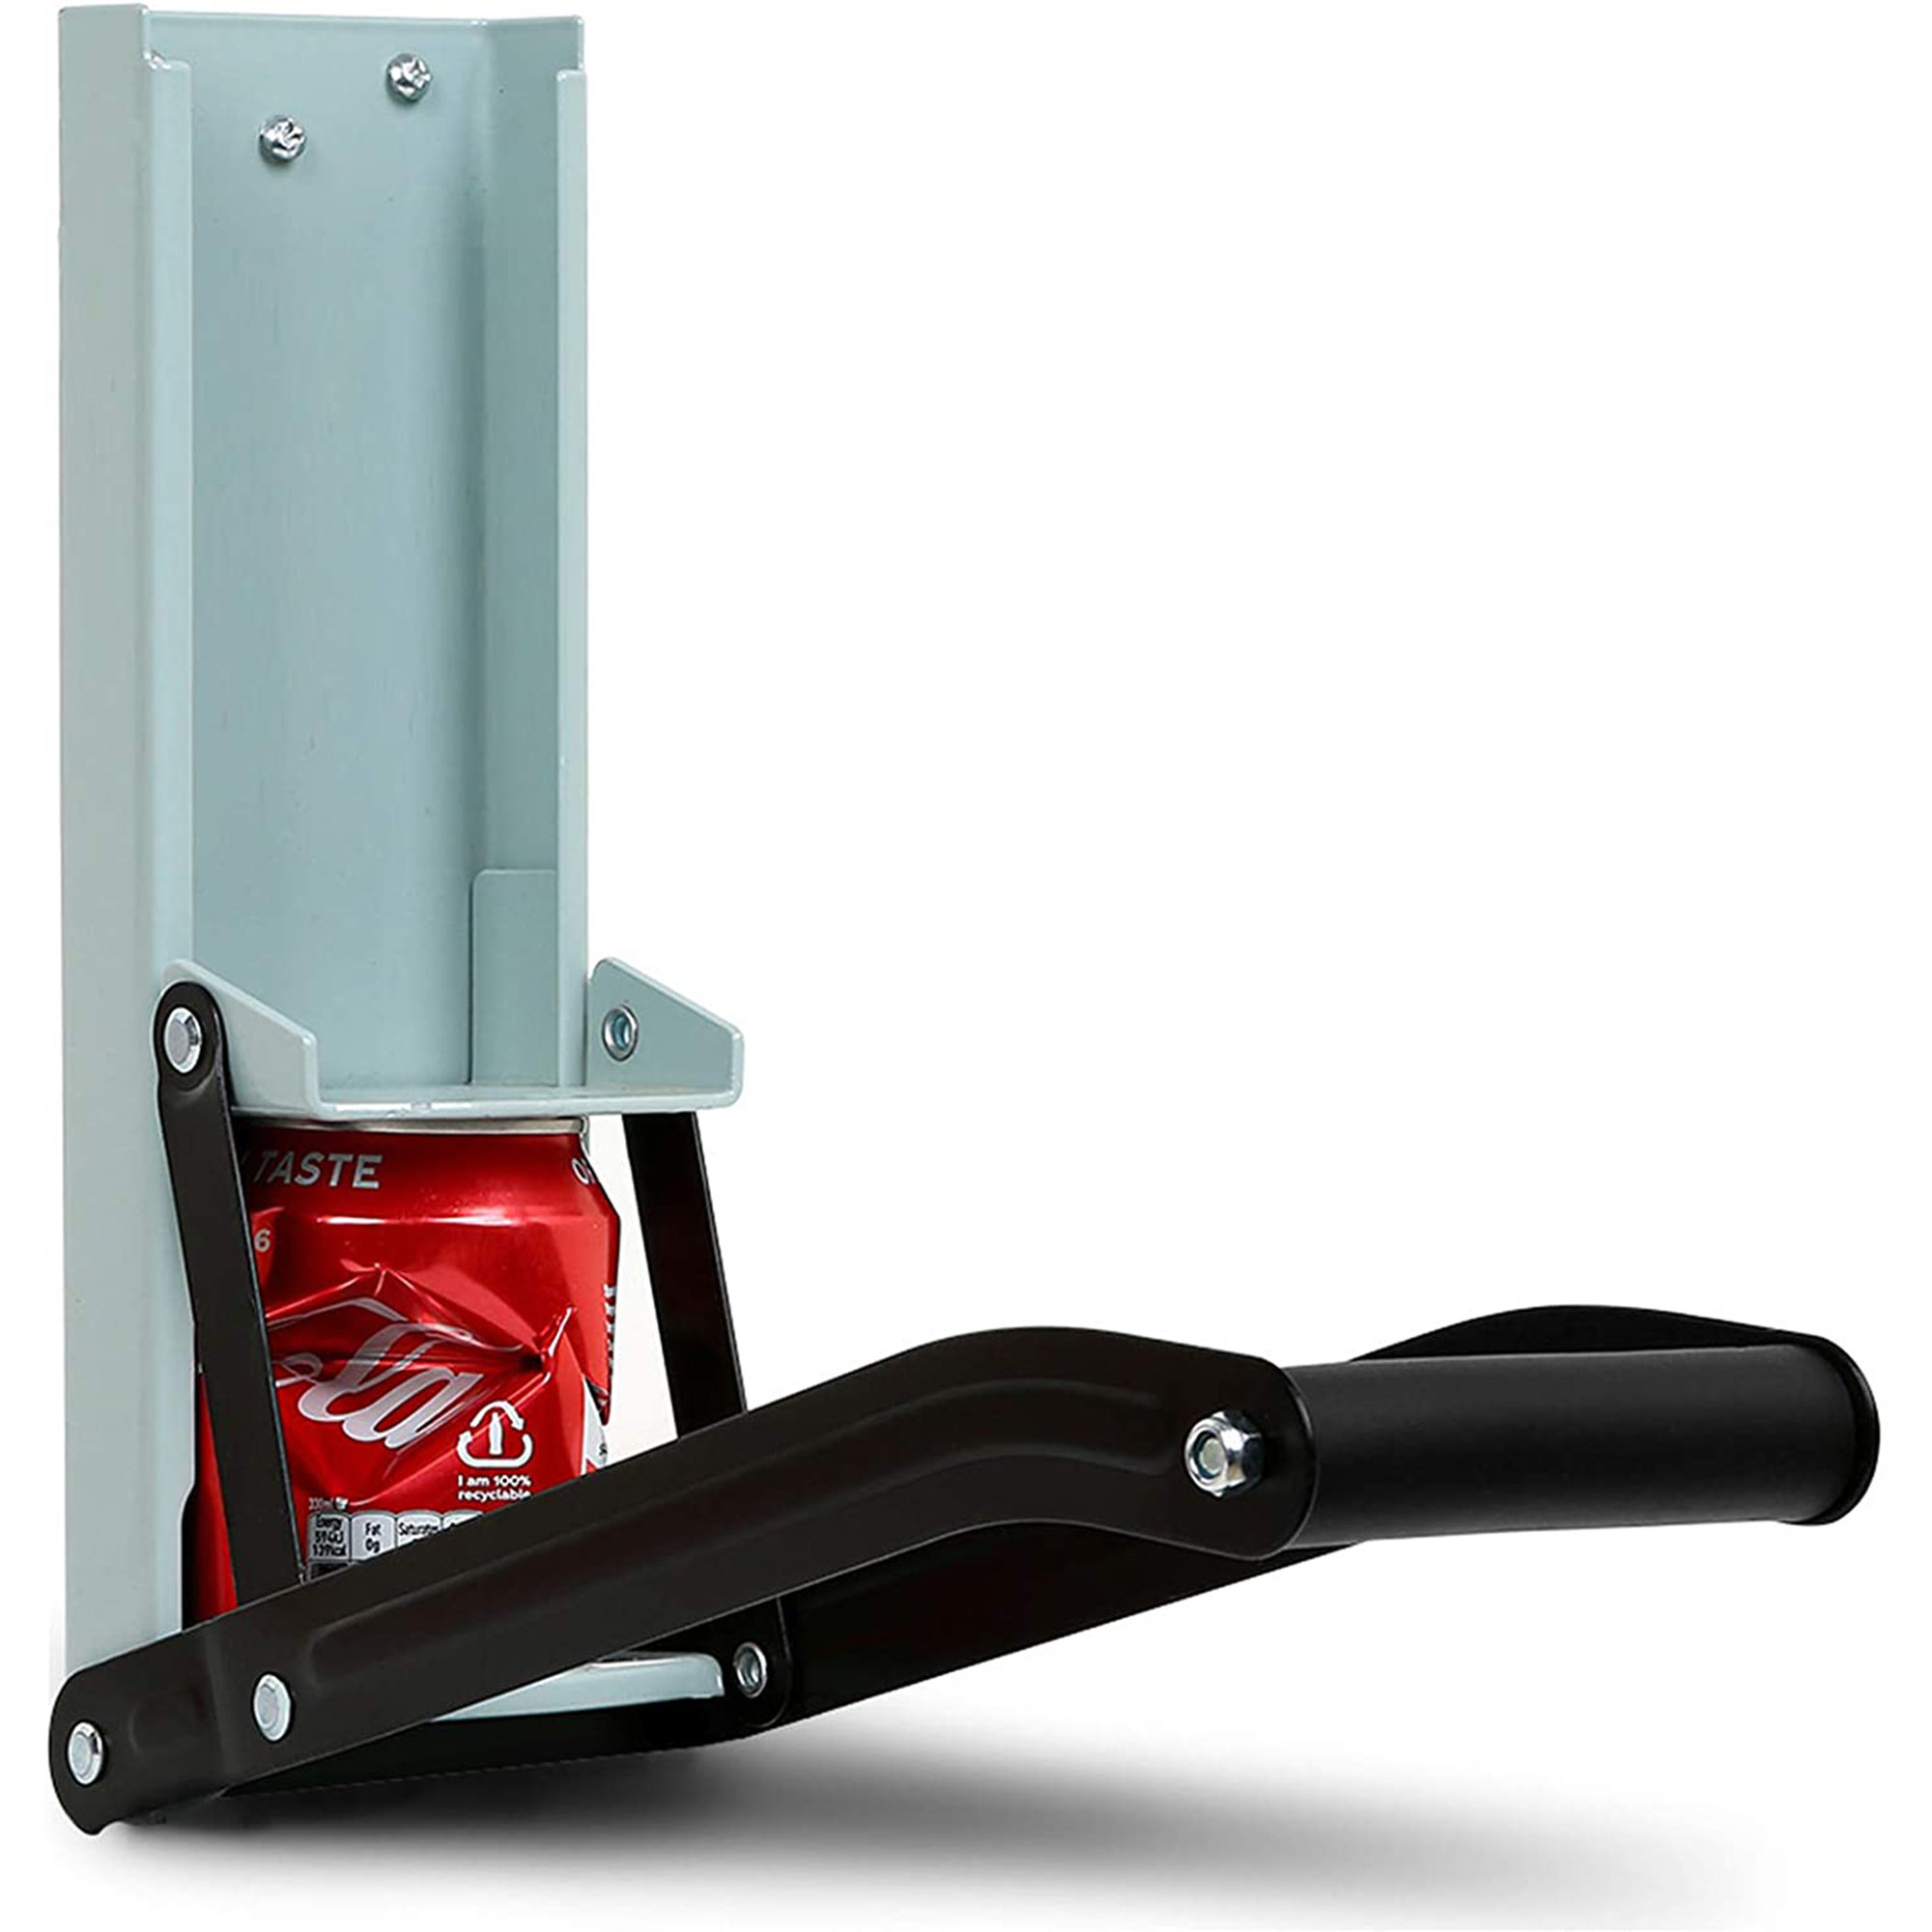 1PC Can Press Crusher Recovery Tool Wall-mounted Beer Can Opener